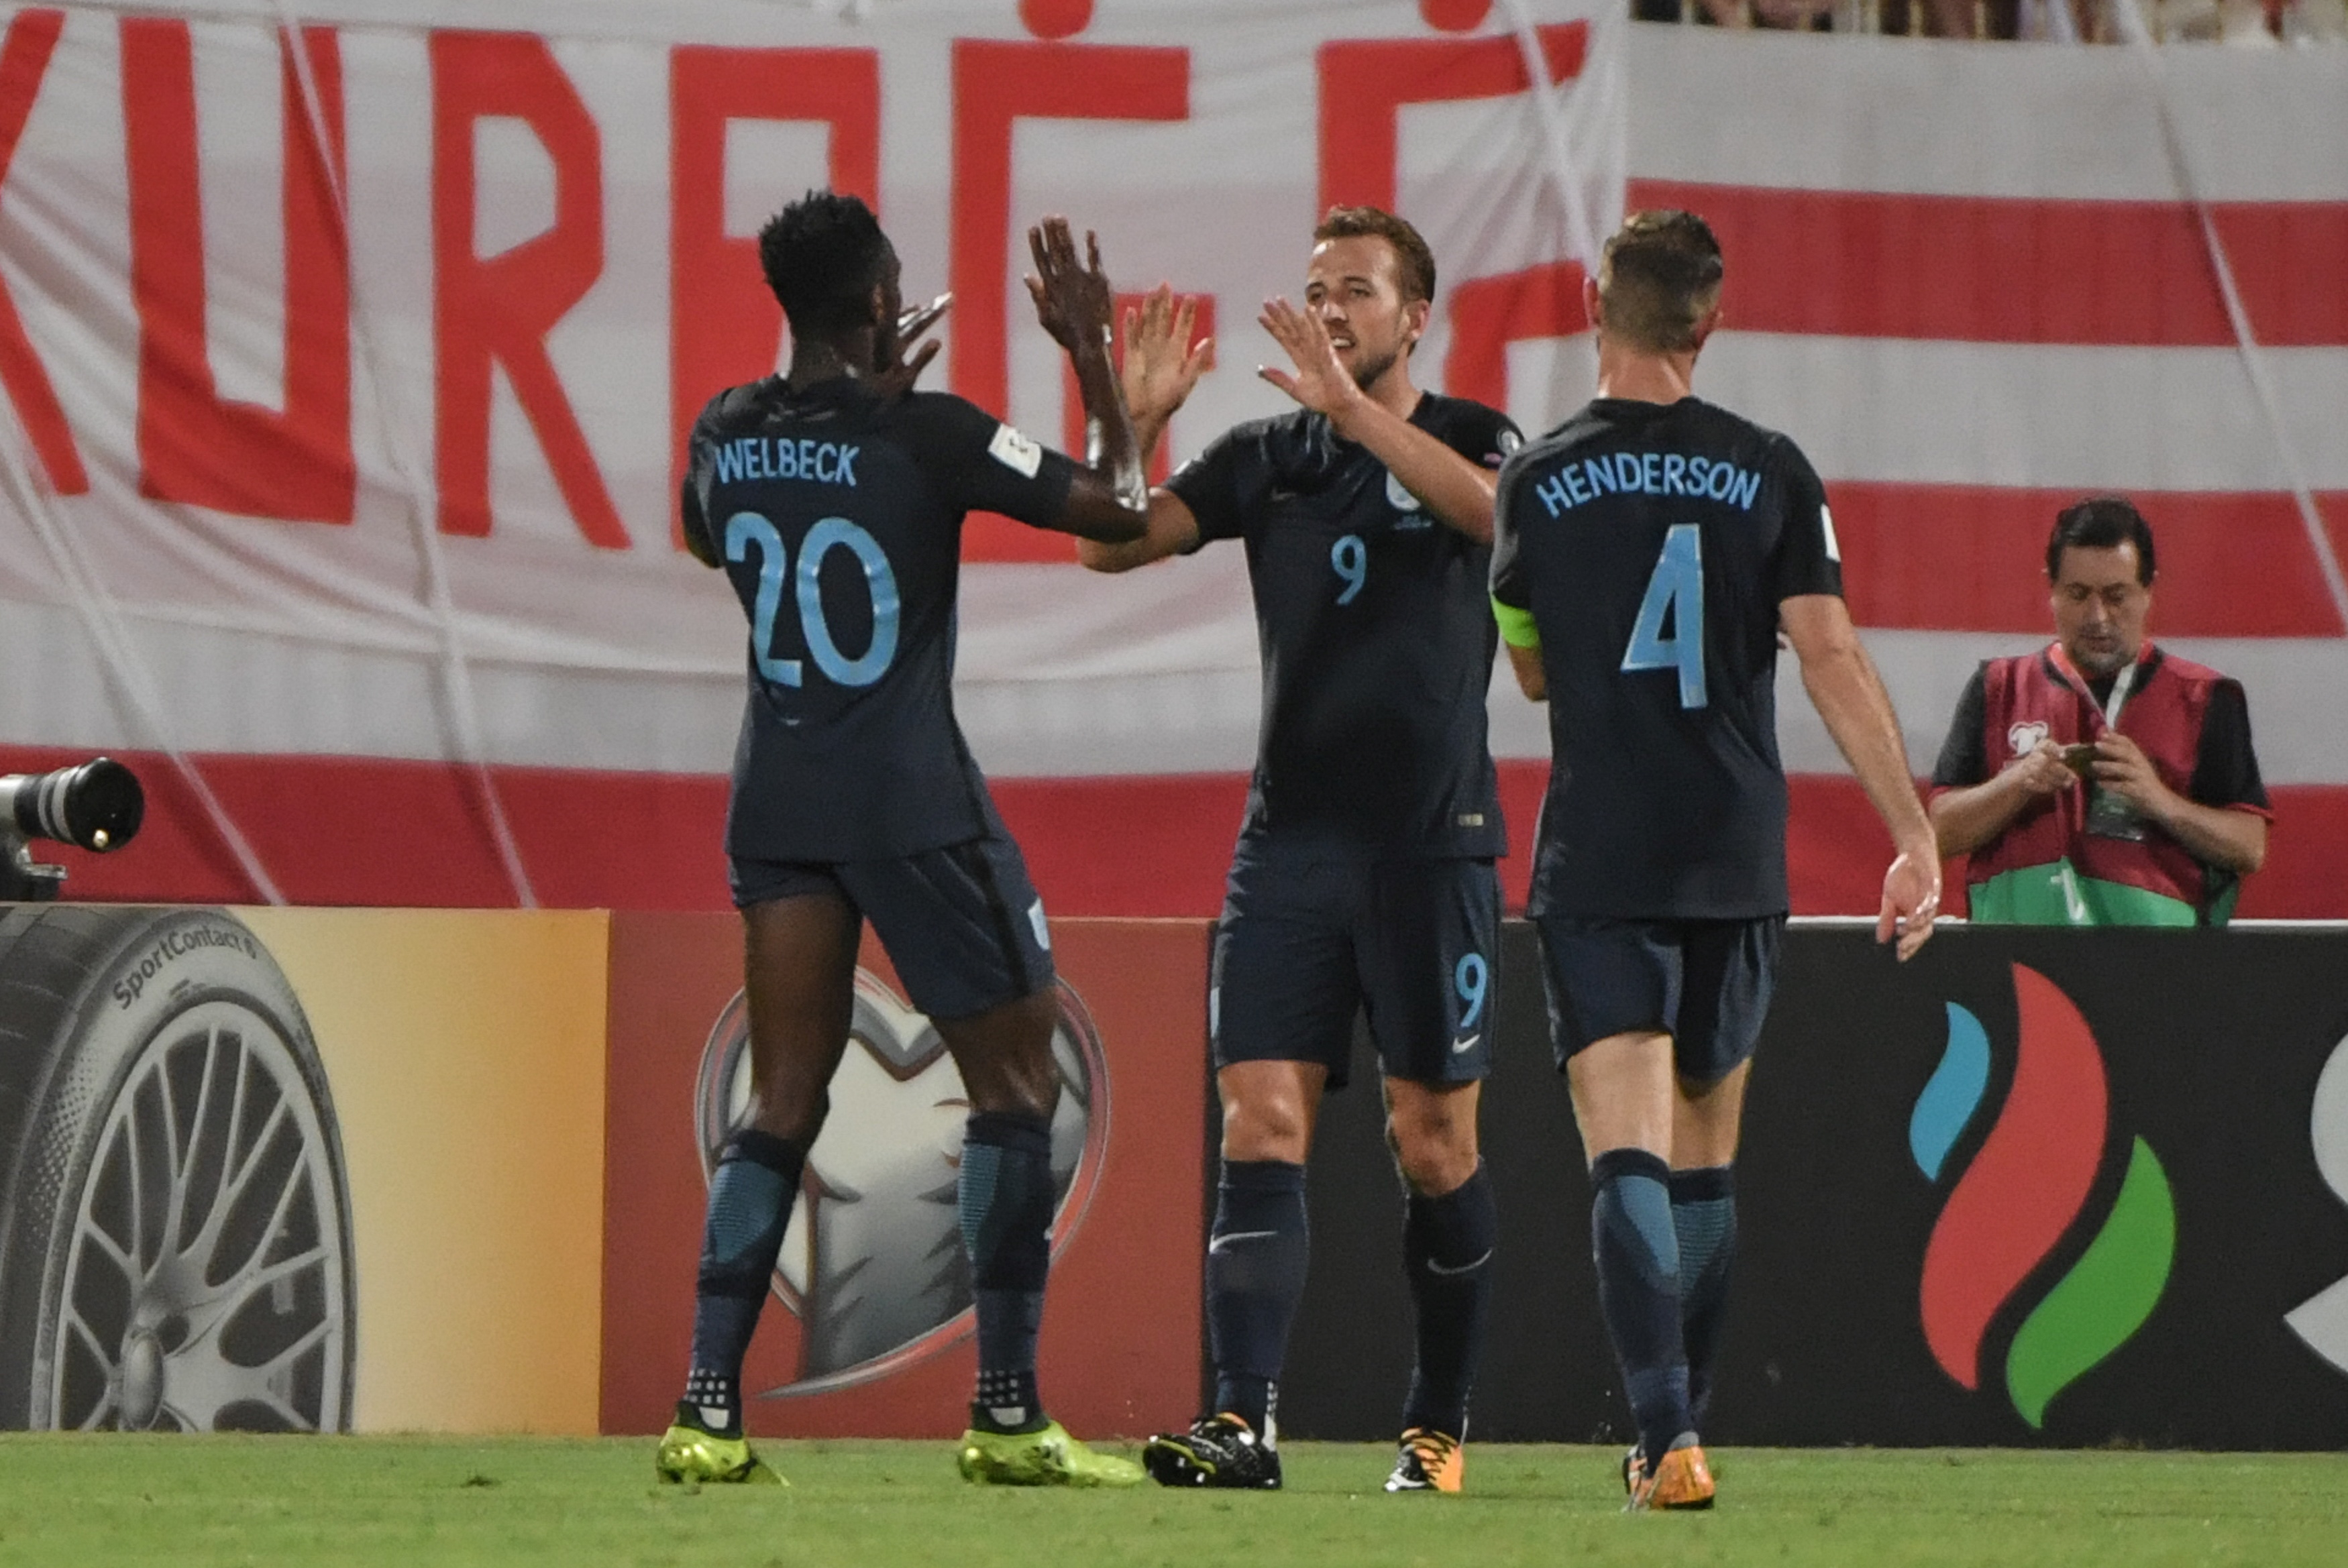 England's striker Harry Kane (C) celebrates with his team mates after scoring against Malta during  the 2018 FIFA World Cup qualifying football match Malta vs England at the National Stadium in Malta's Ta' Qali village, on September 1, 2017.  / AFP PHOTO / ANDREAS SOLARO        (Photo credit should read ANDREAS SOLARO/AFP/Getty Images)